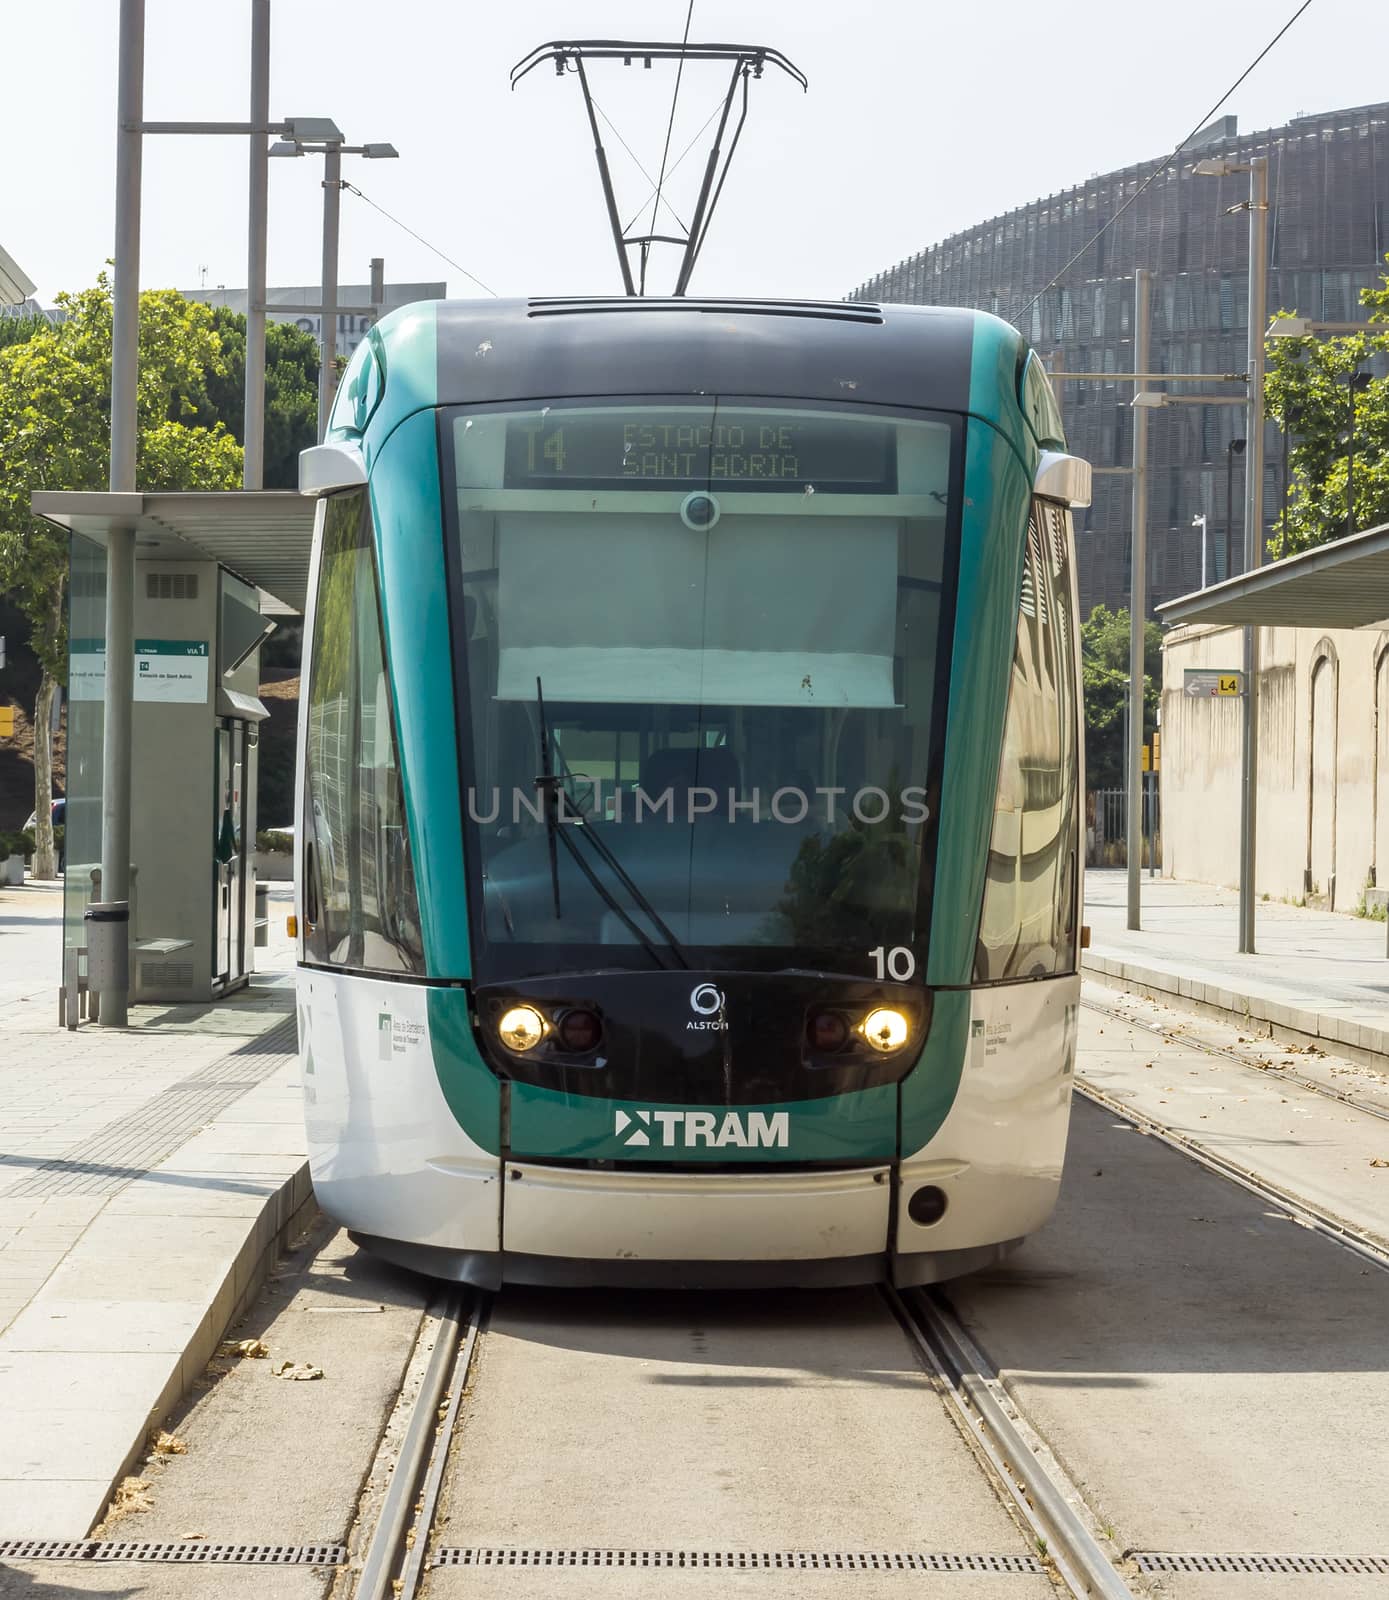 BARCELONA, SPAIN - JULY 12, 2015: Barcelona tram known as Trambaix. The tram is going through the Diagonal avenue.

Barcelona, Spain - July 12, 2015: Barcelona tram known as Trambaix. The tram is going through the Diagonal avenue.